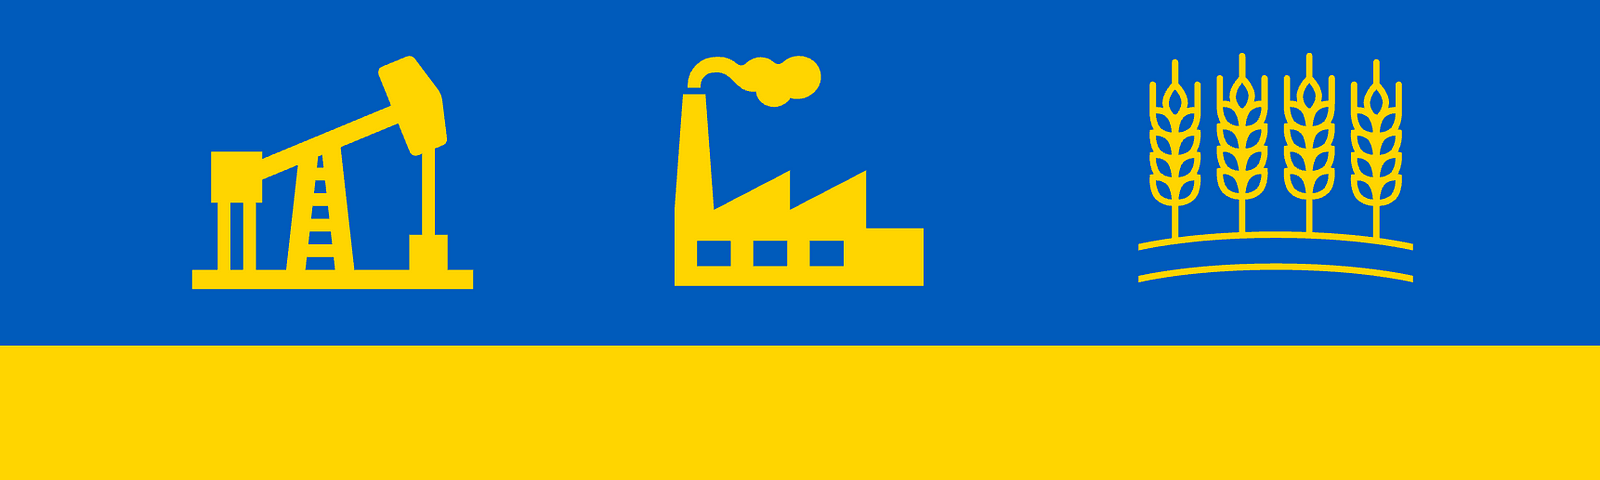 The Ukrainian Flag with symbols for Oil, Gas, and Food overlaid.